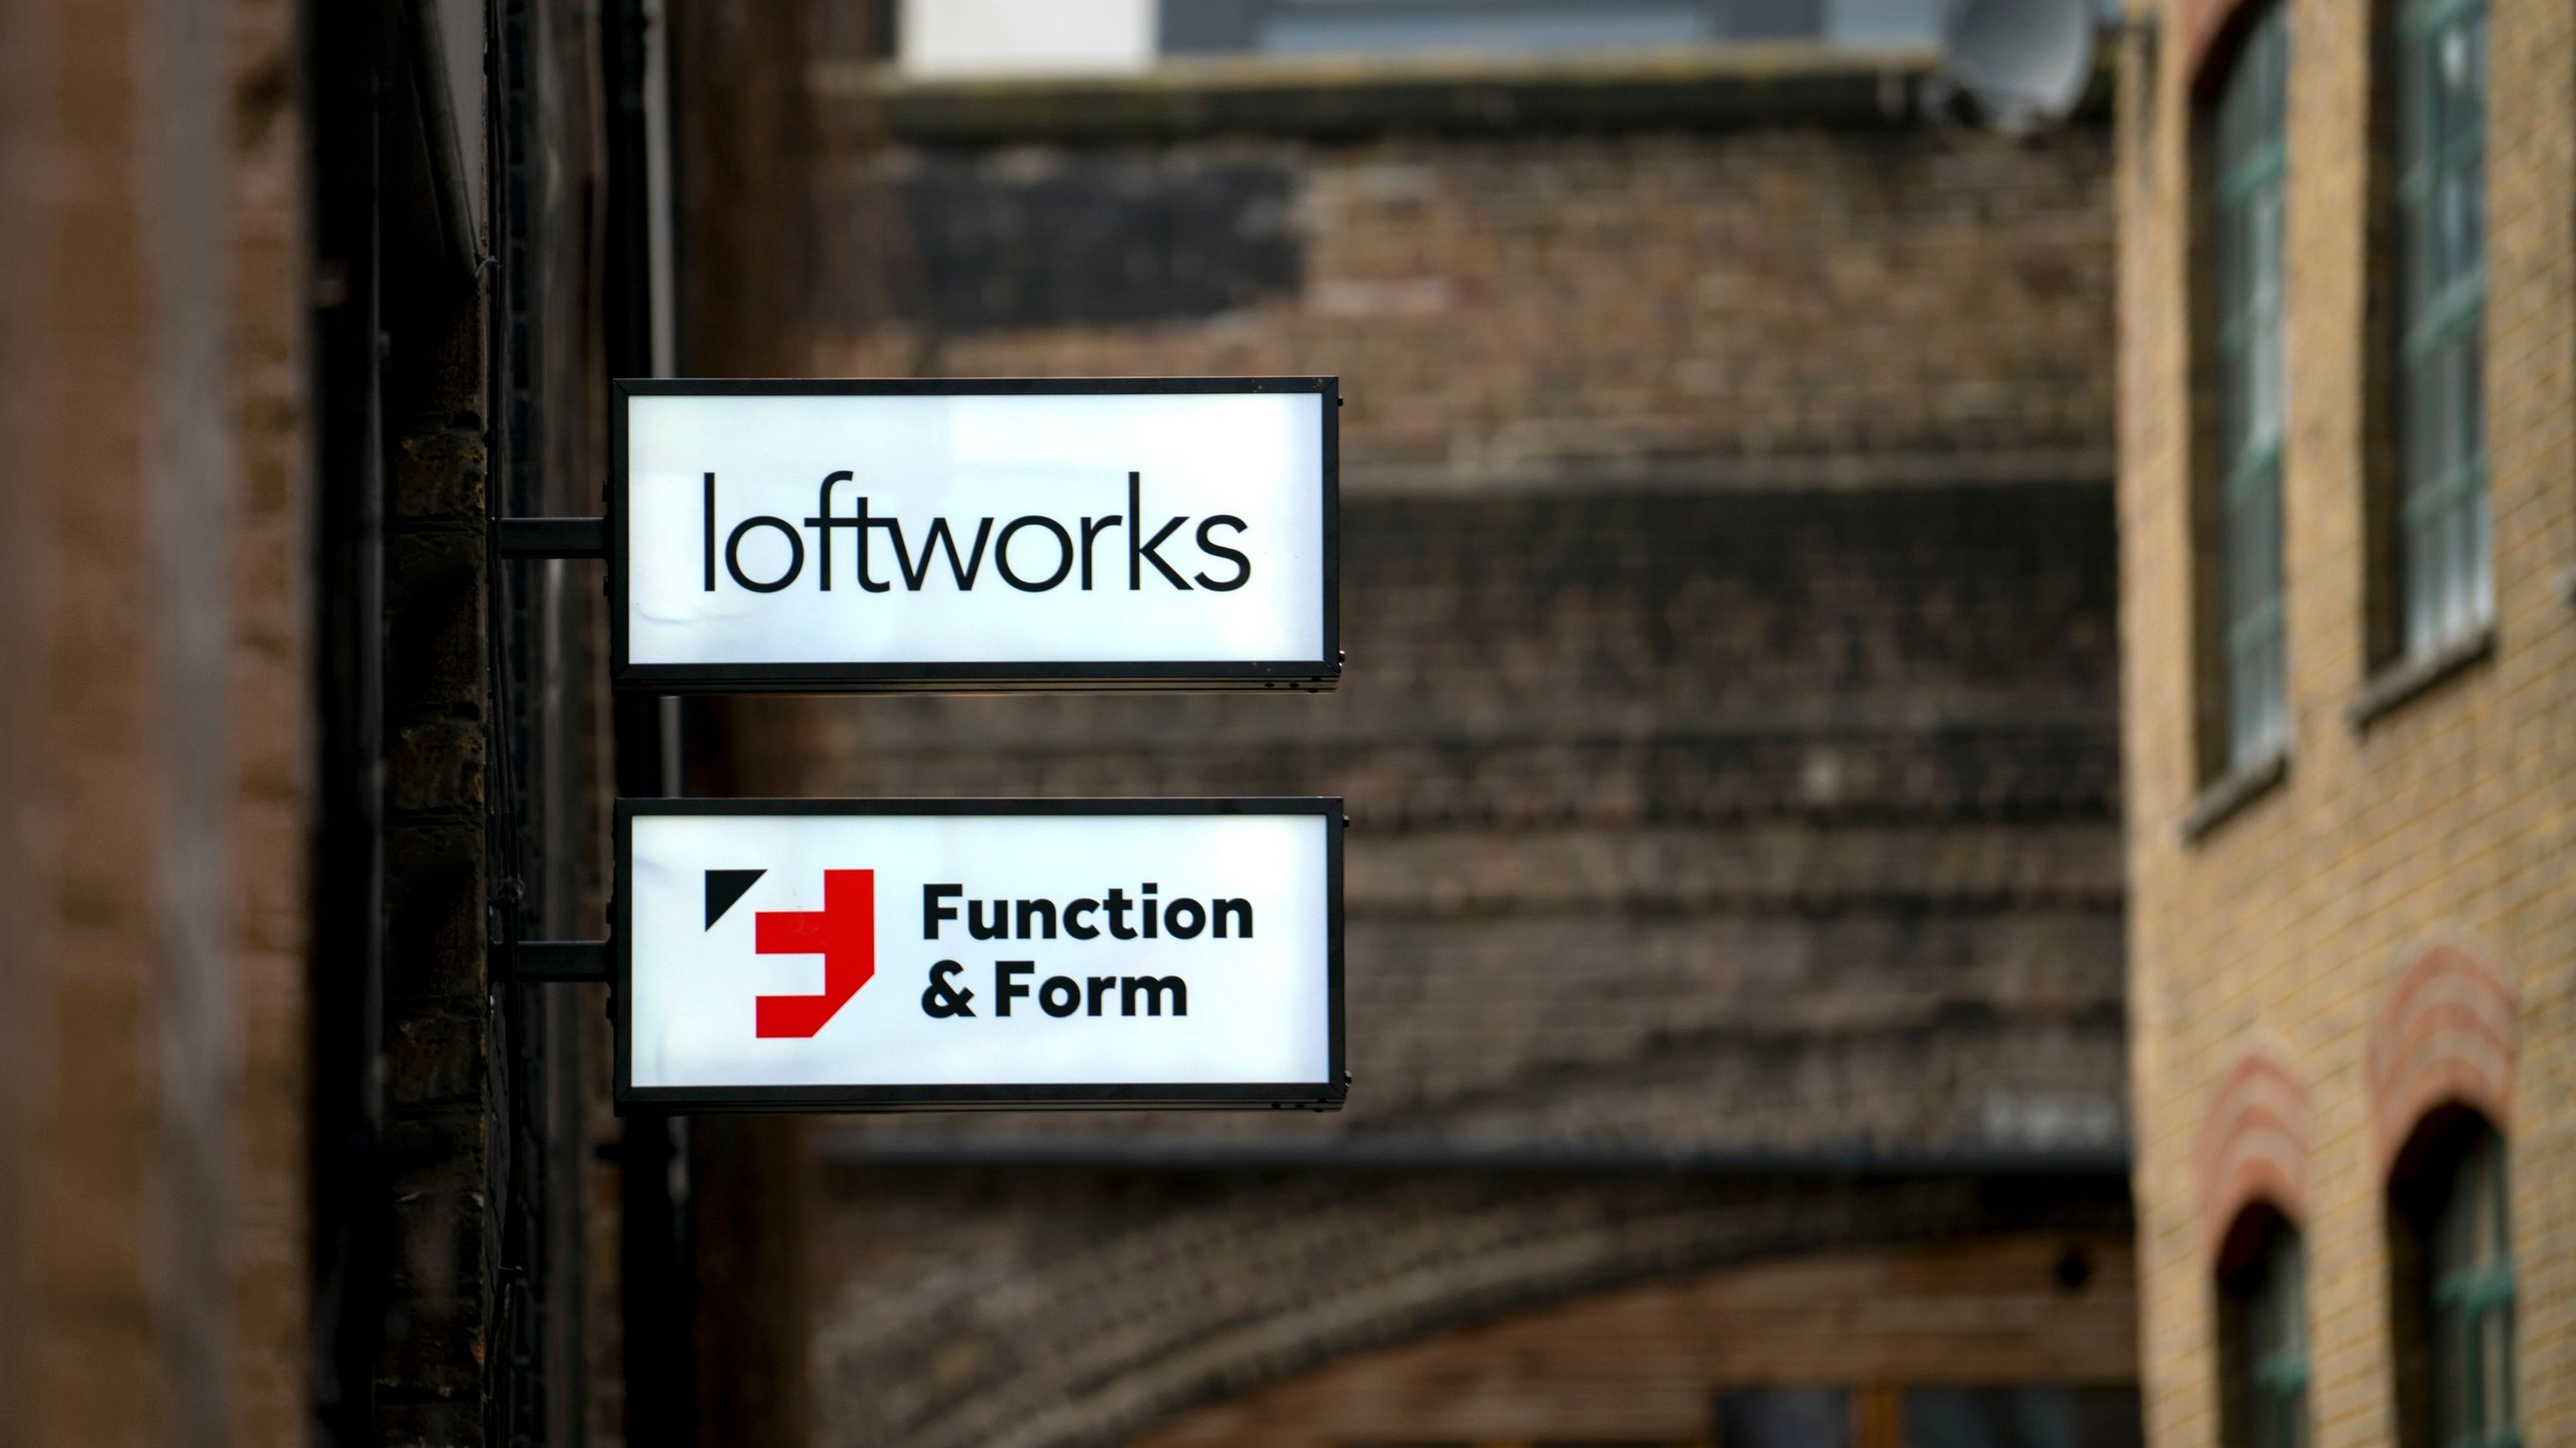 Function & Form and Loftworks office, London, 2017